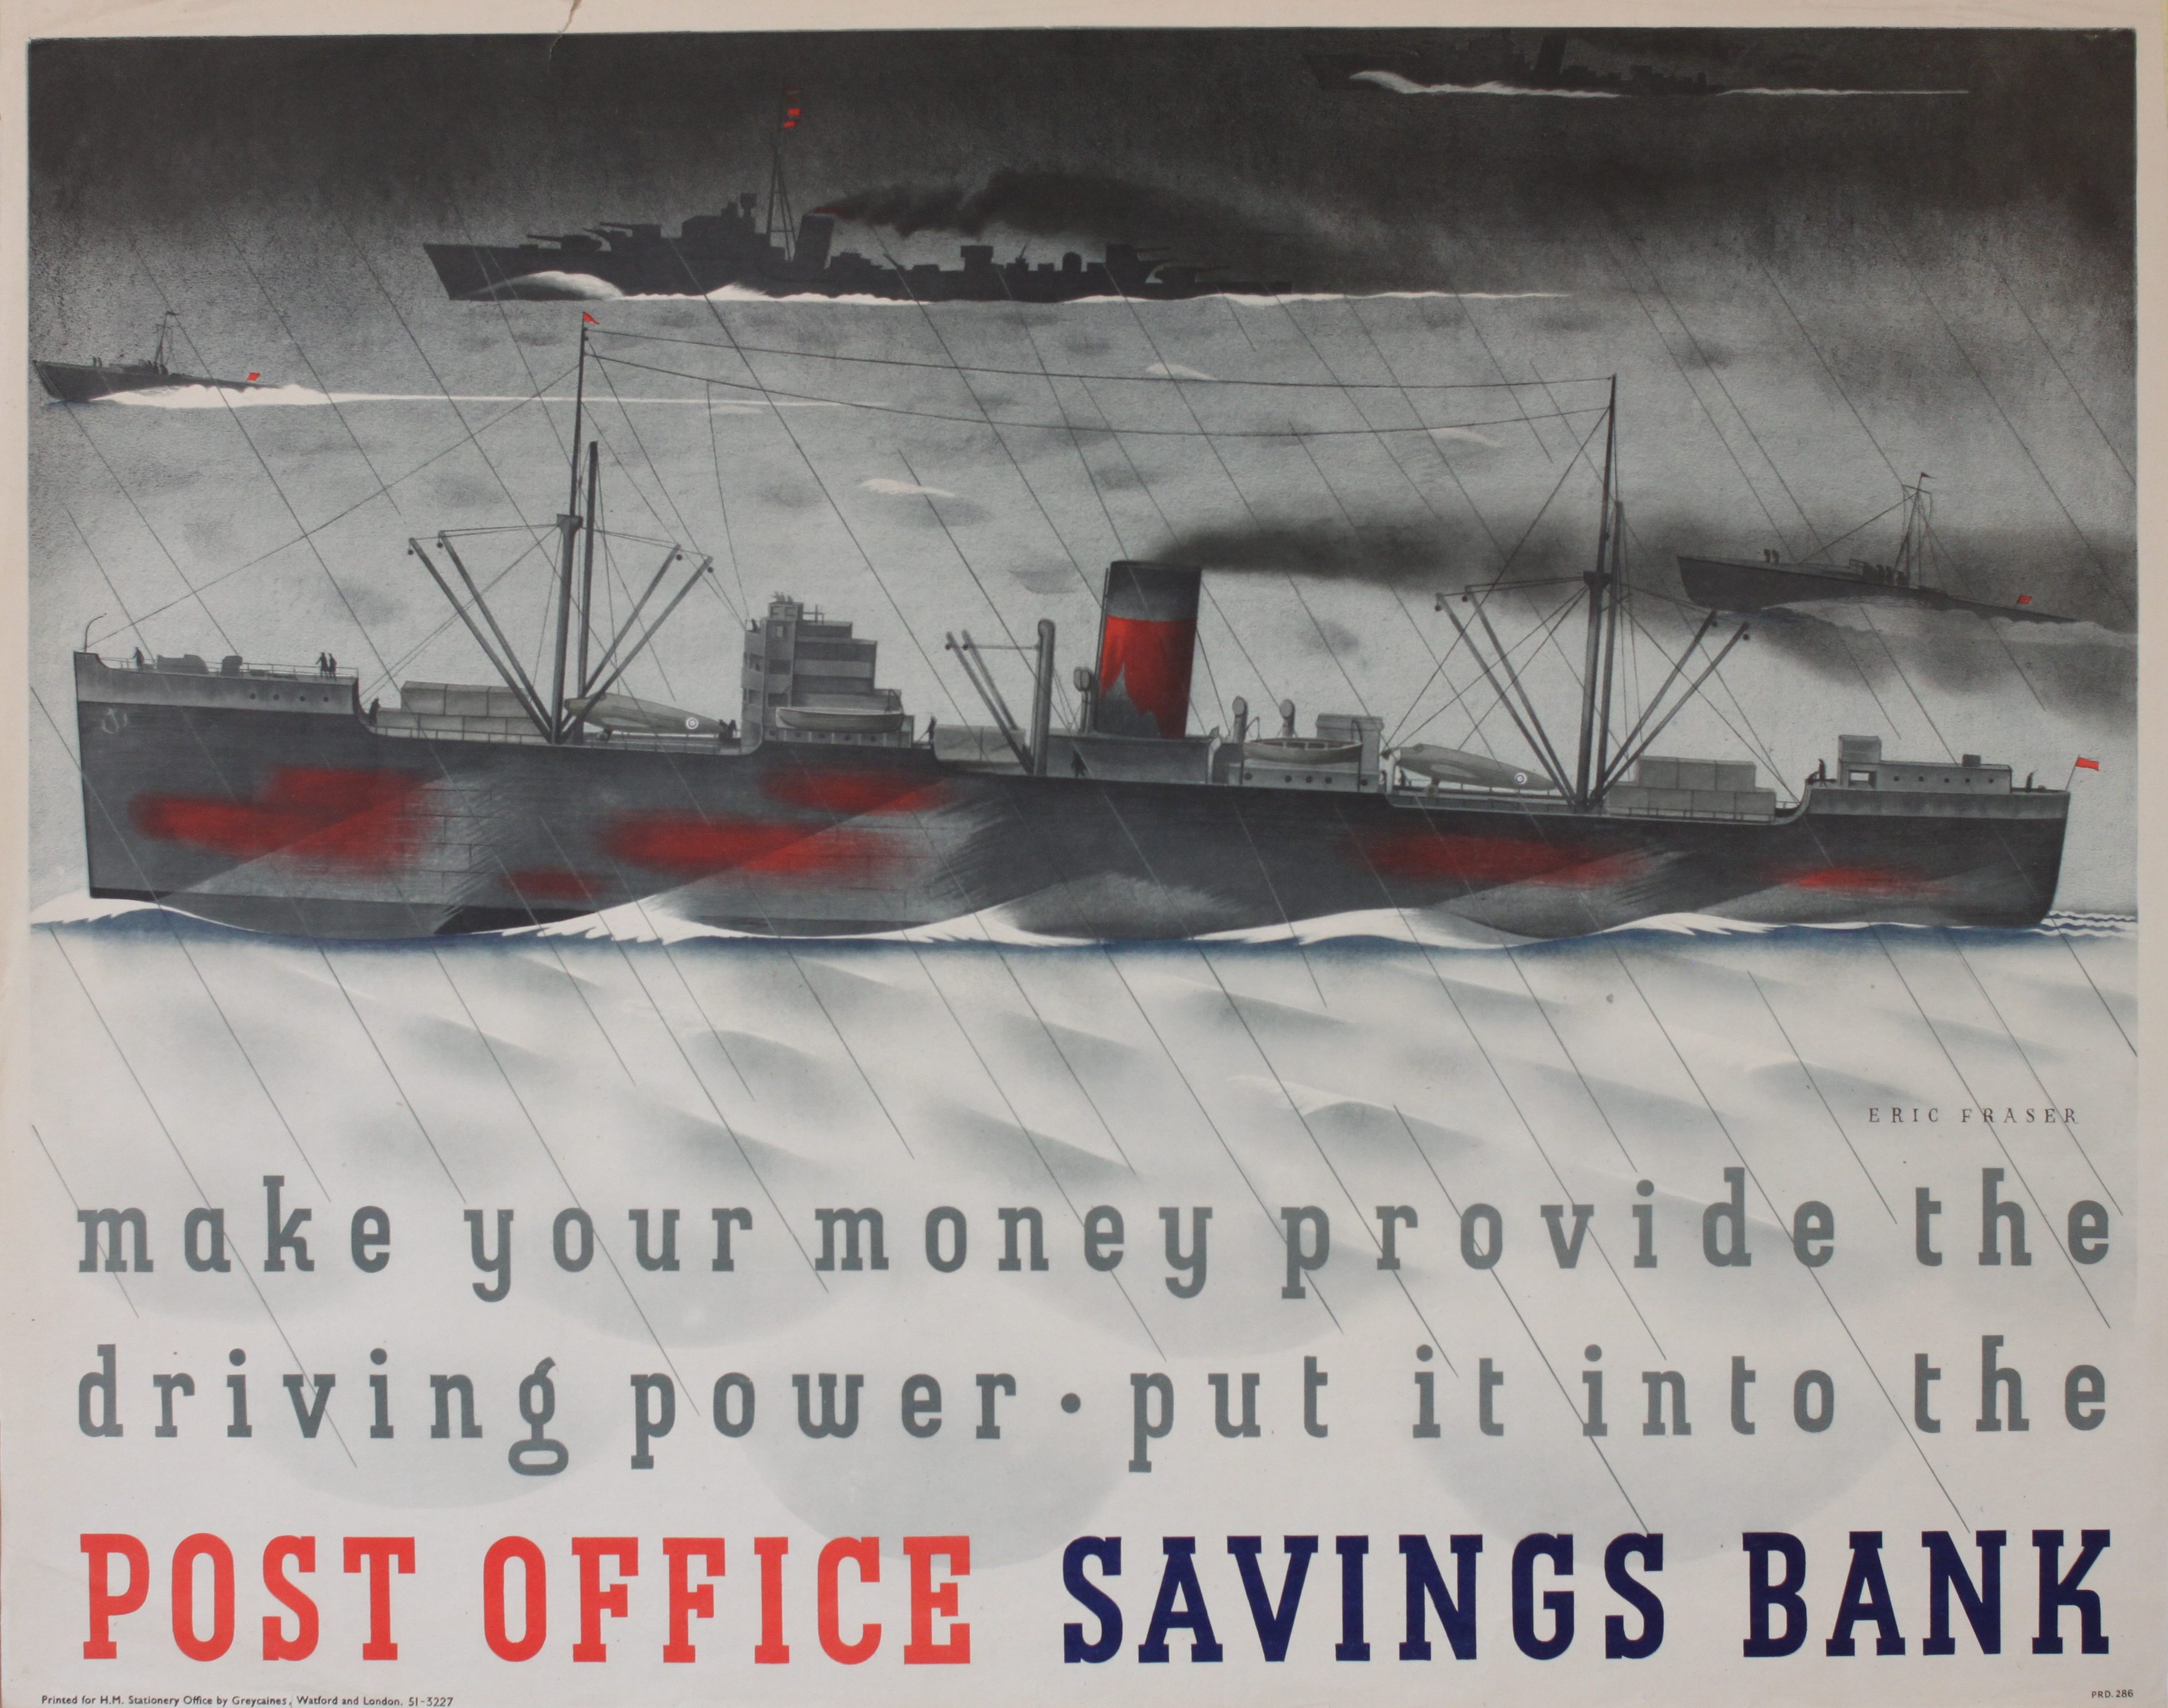 Eric Fraser (1902-1983) Make your money provide the driving power, Post Office Savings Bank, 1943, 92 x 73 cm (est. £400-£500). Onslows images